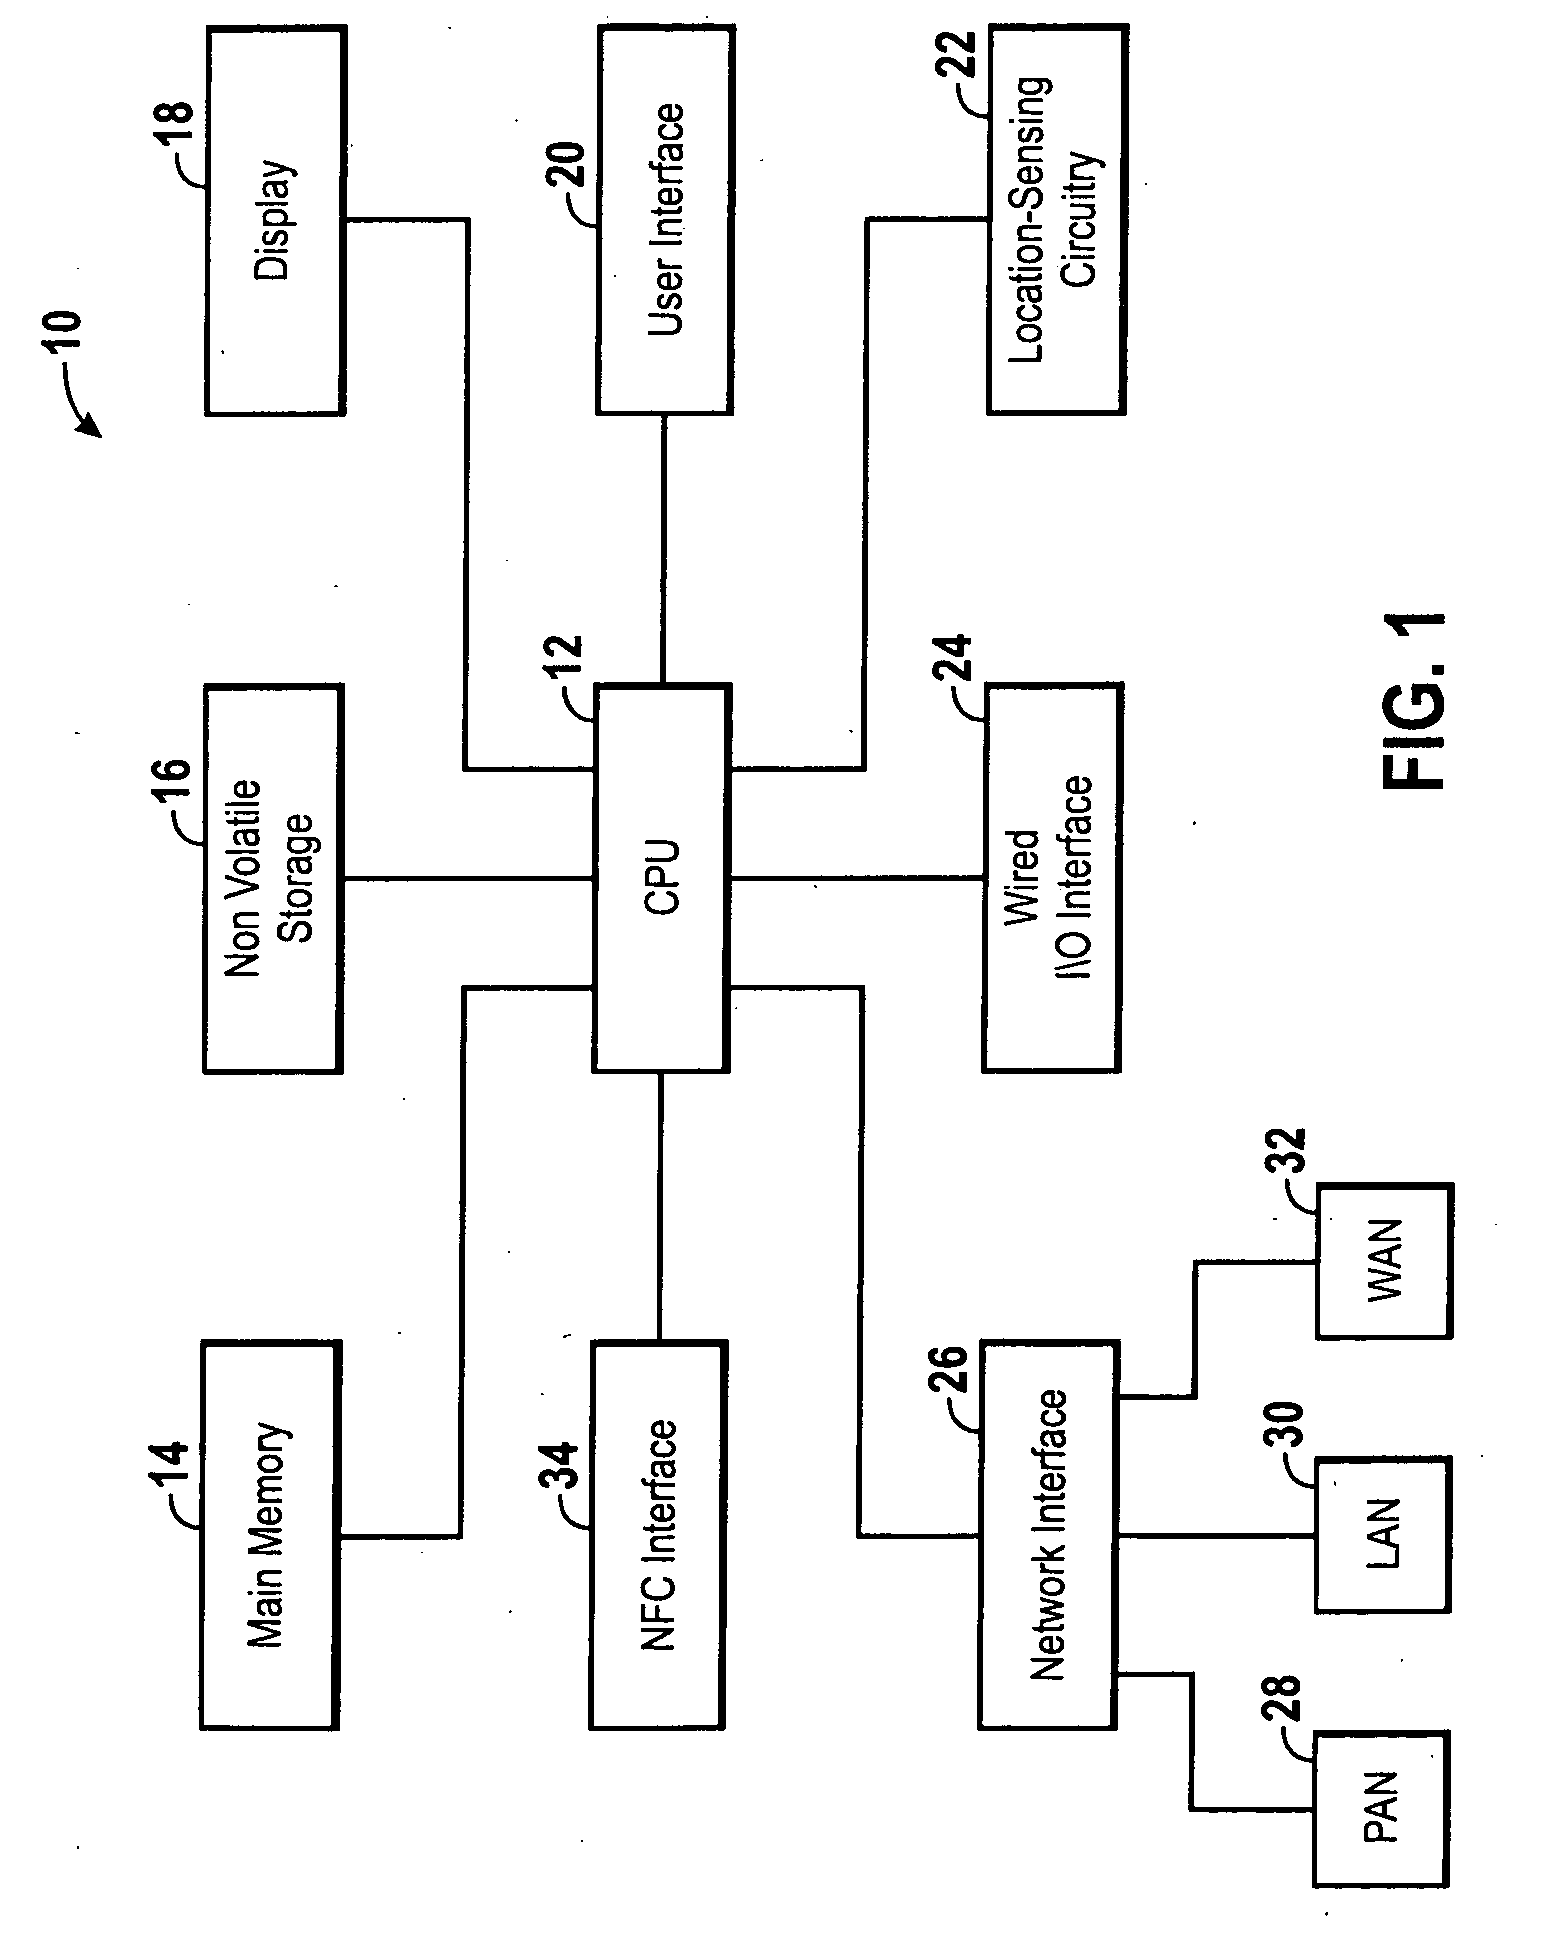 System and method for simplified data transfer